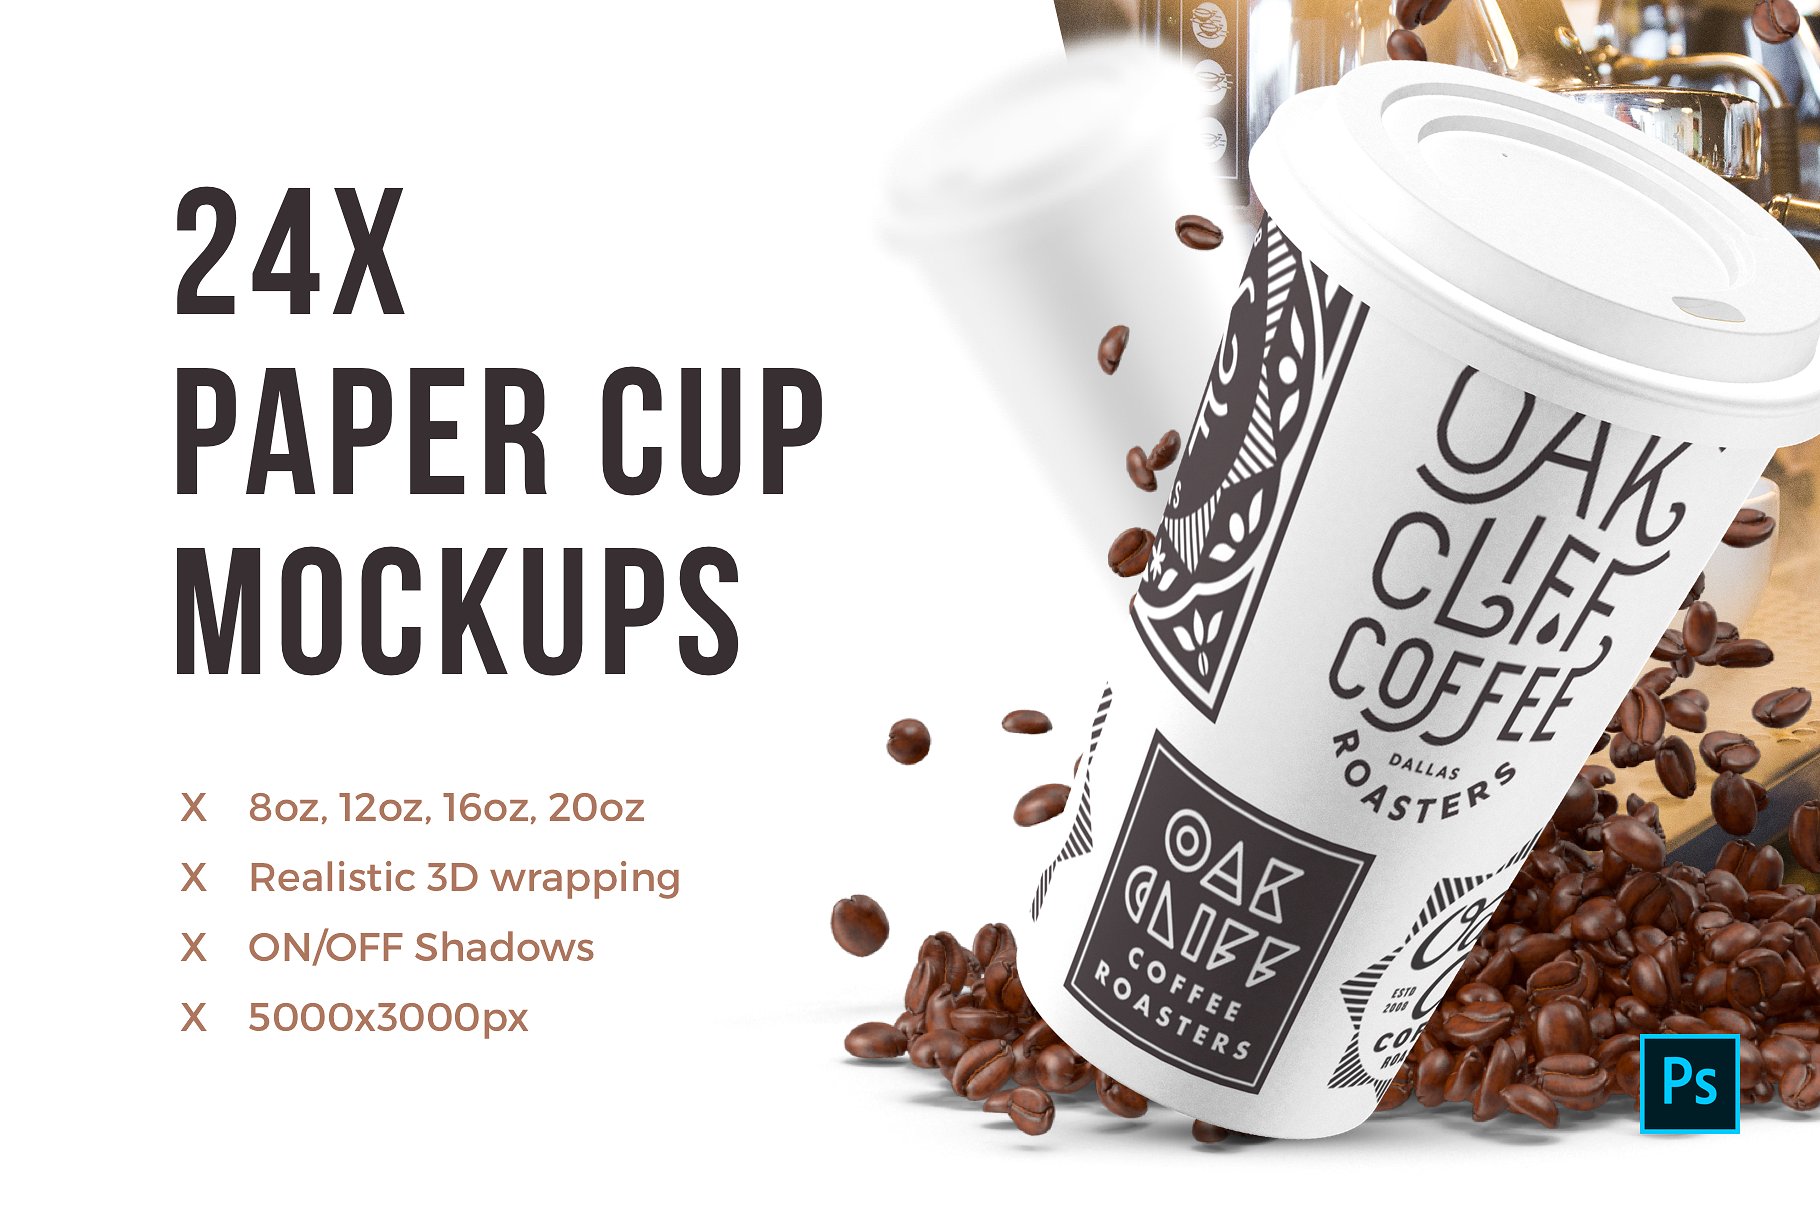 A set of 24 real paper cup mockups